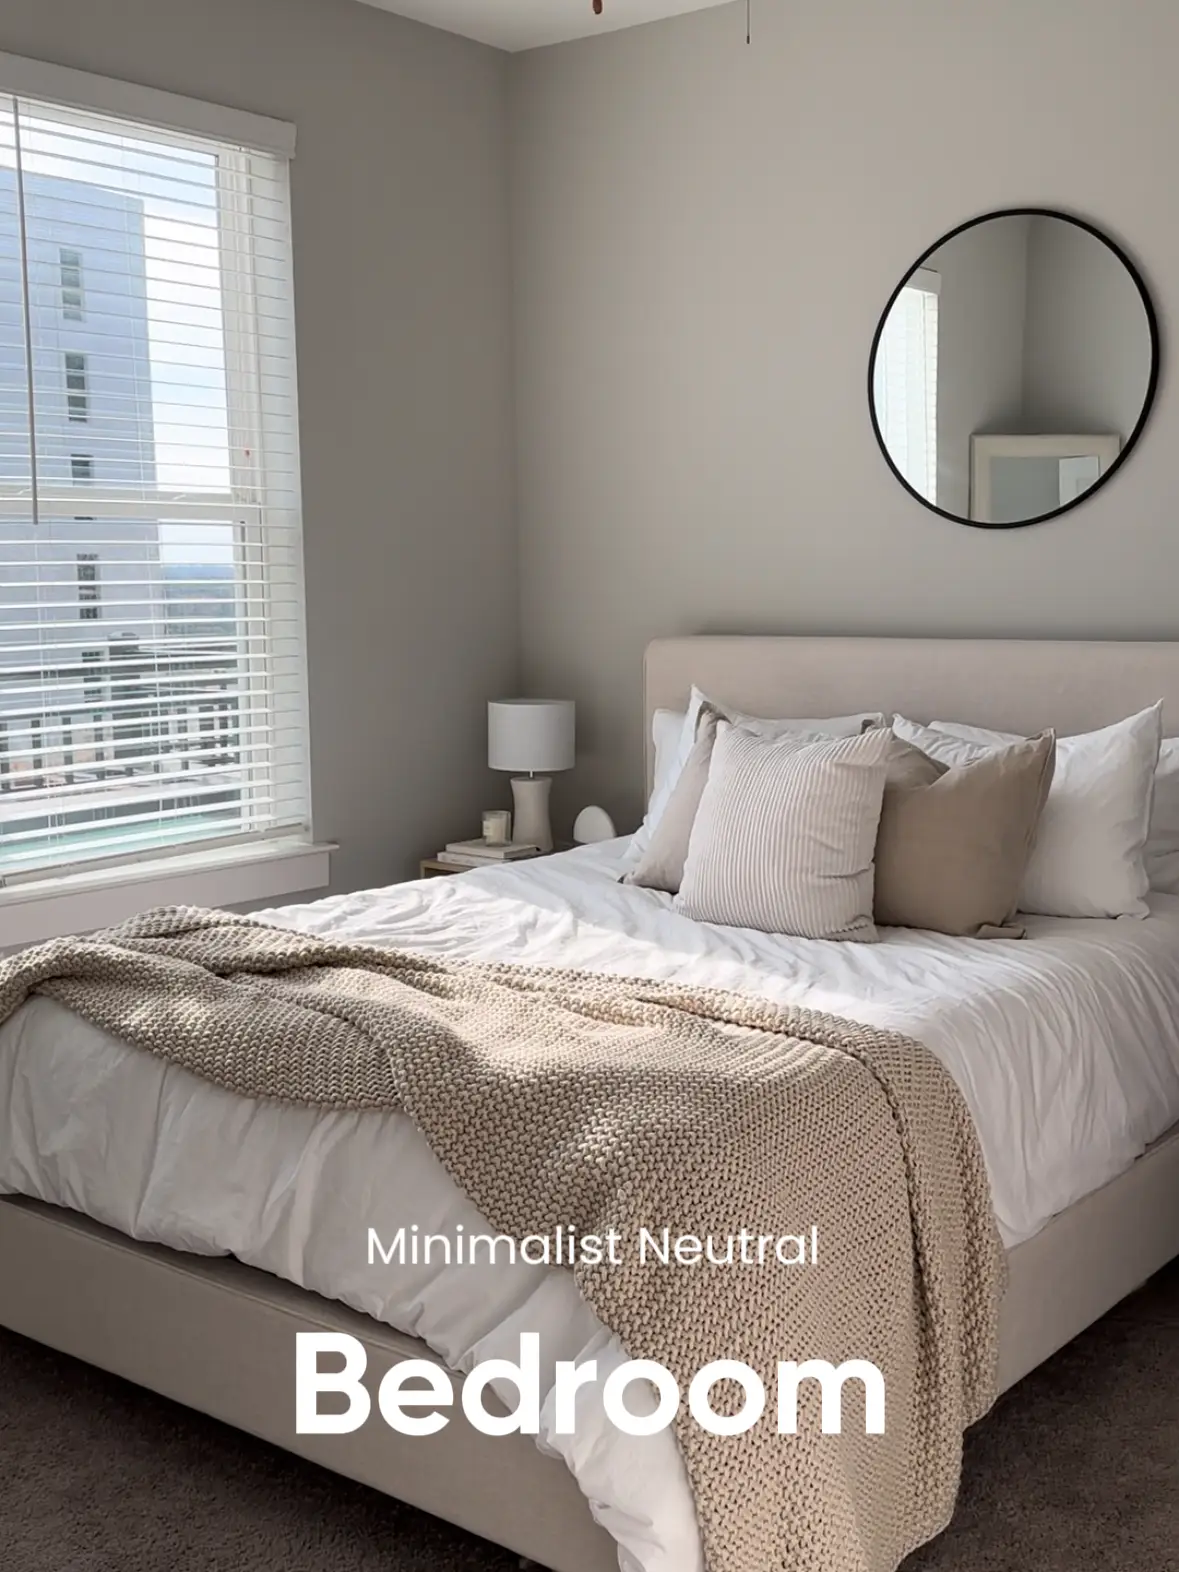 Minimalistic neutral bedroom ???????????? | Gallery posted by ...